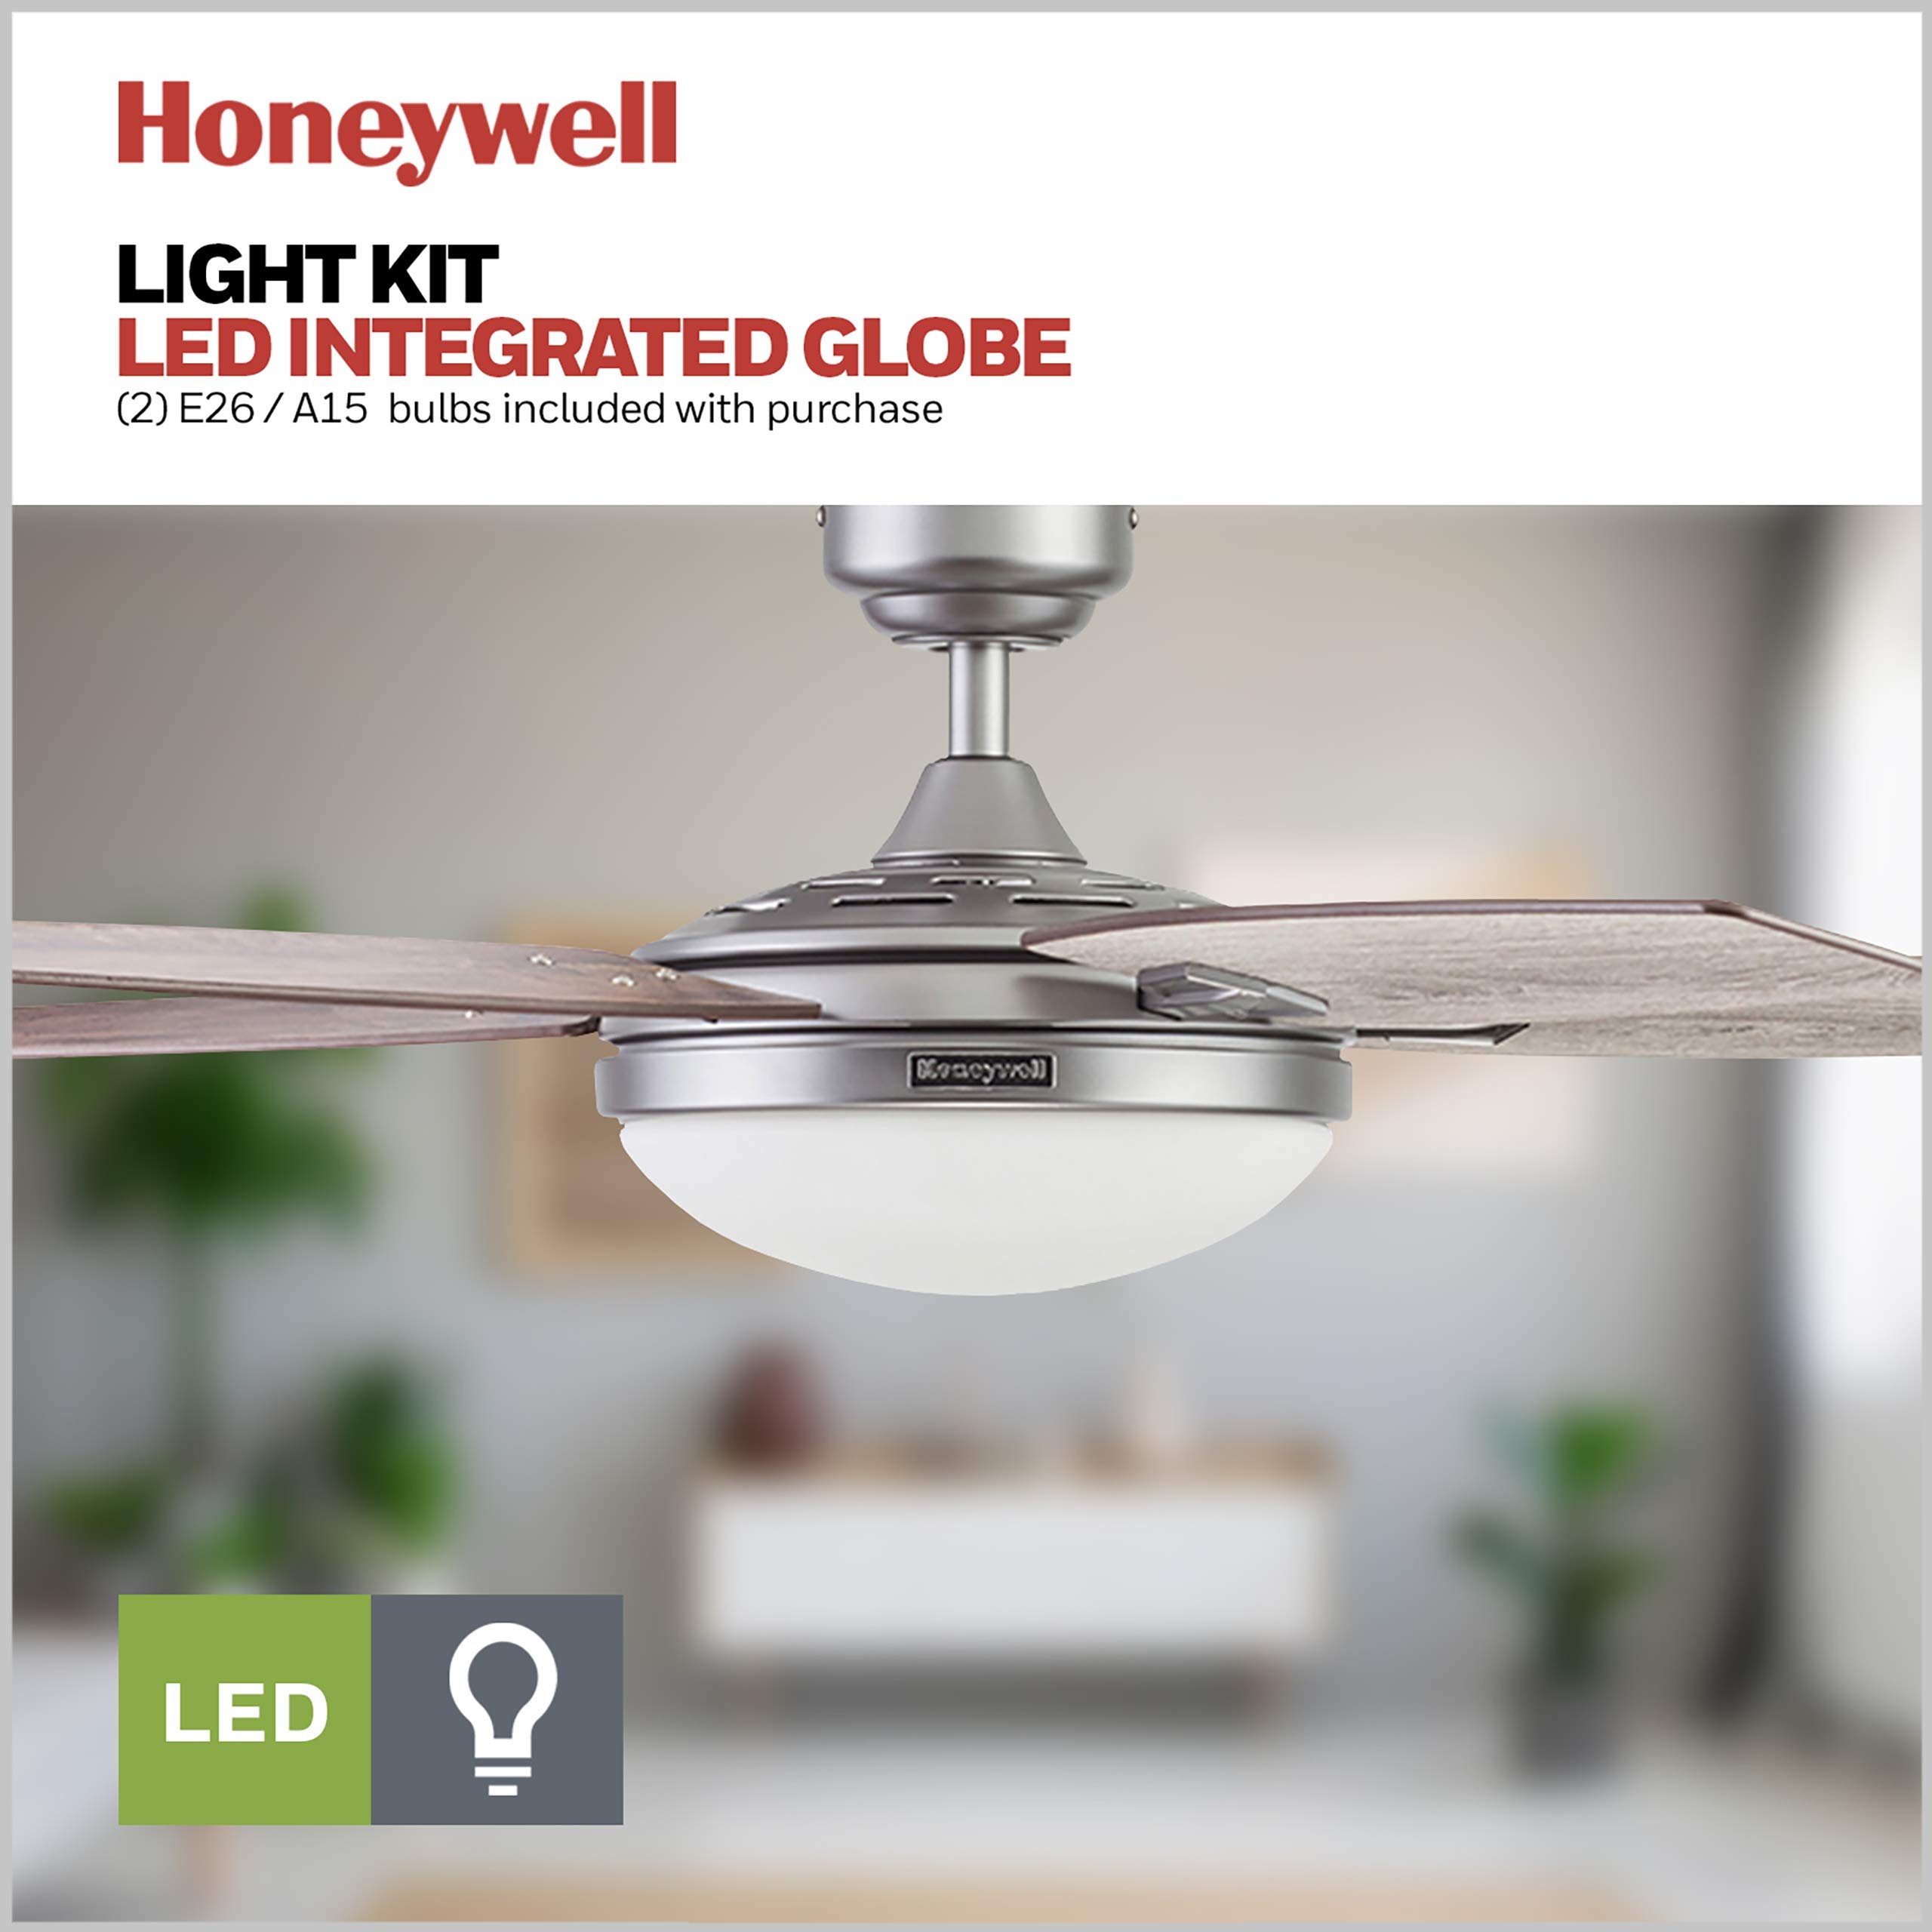 Honeywell Ceiling Fans Carmel, 48 Inch Contemporary Indoor LED Ceiling Fan with Light, Remote Control, Dual Mounting Options, Dual Finish Blades, Reversible Motor - 51627-01 (Pewter)